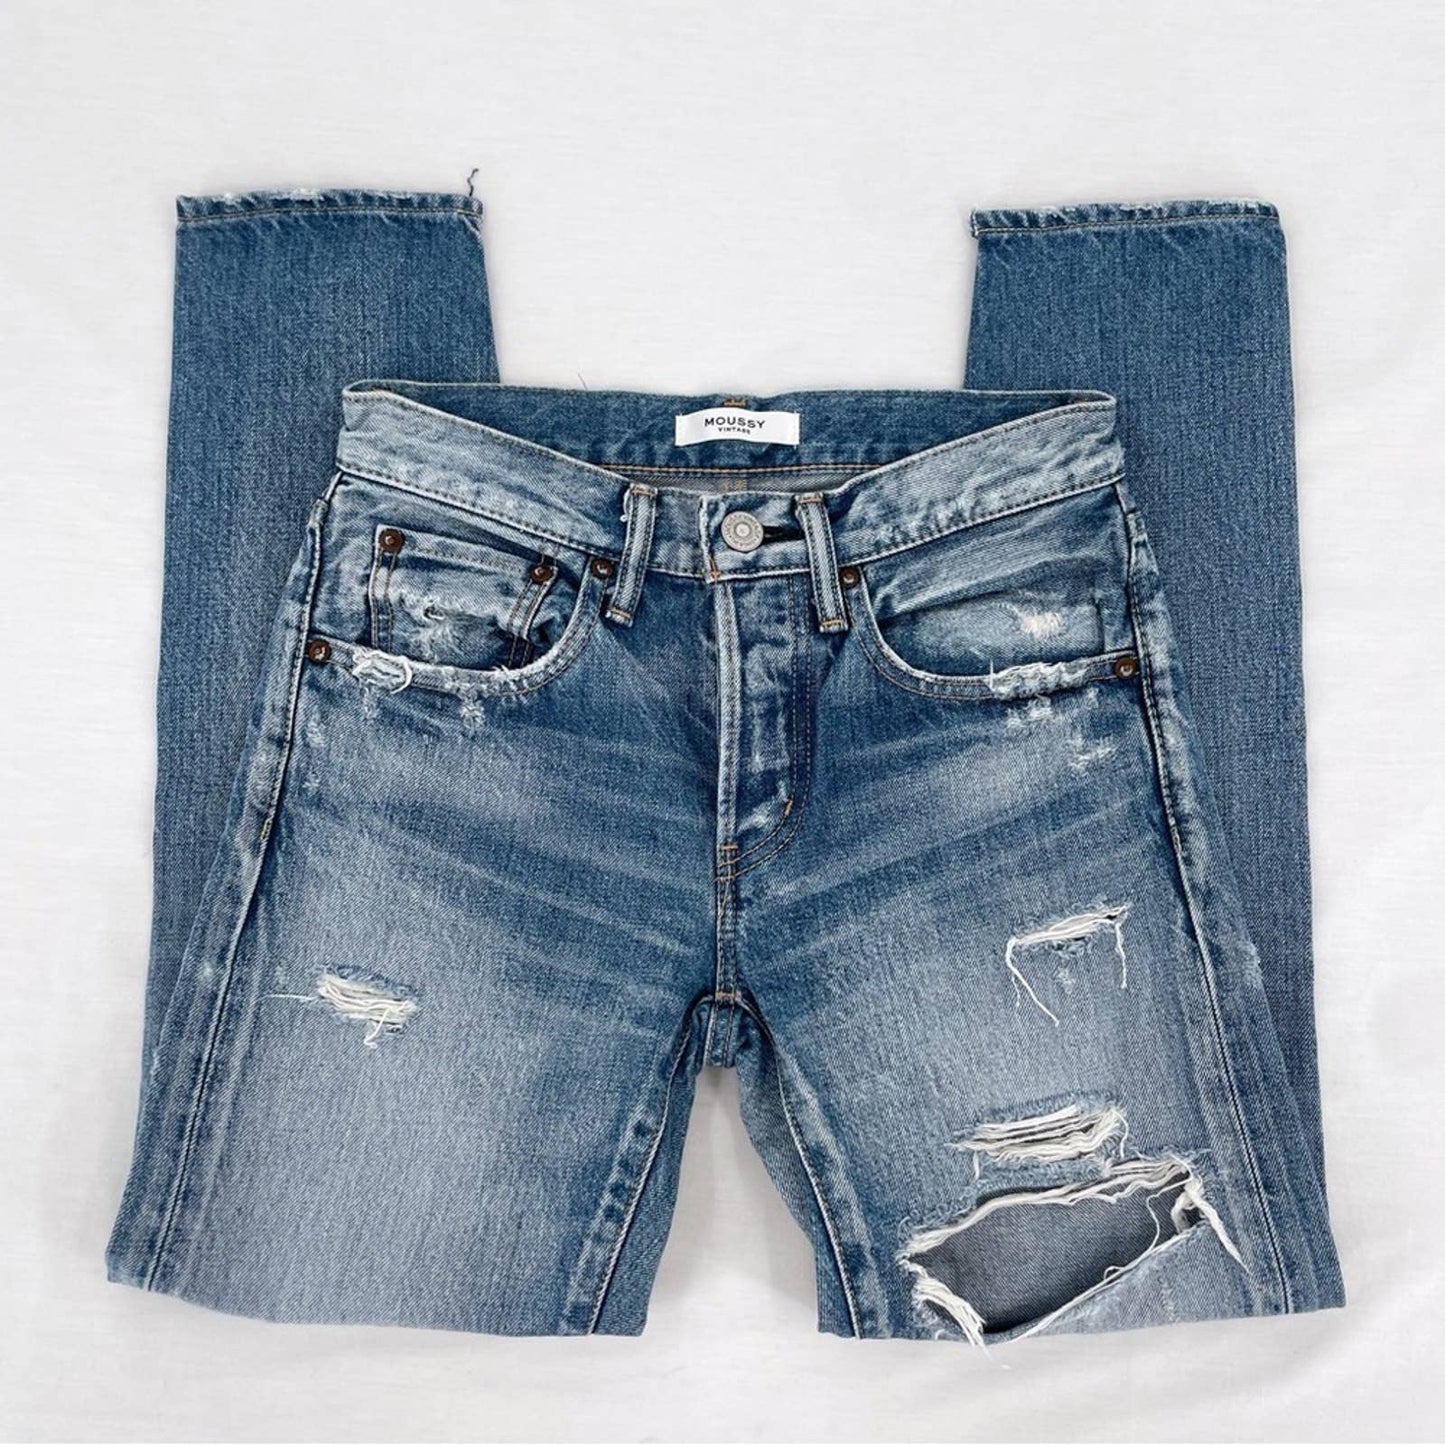 Moussy Vintage Bowie Tapered Straight Leg Light Wash Distressed Blue Jeans Style 025DSC11-1010 Size 24